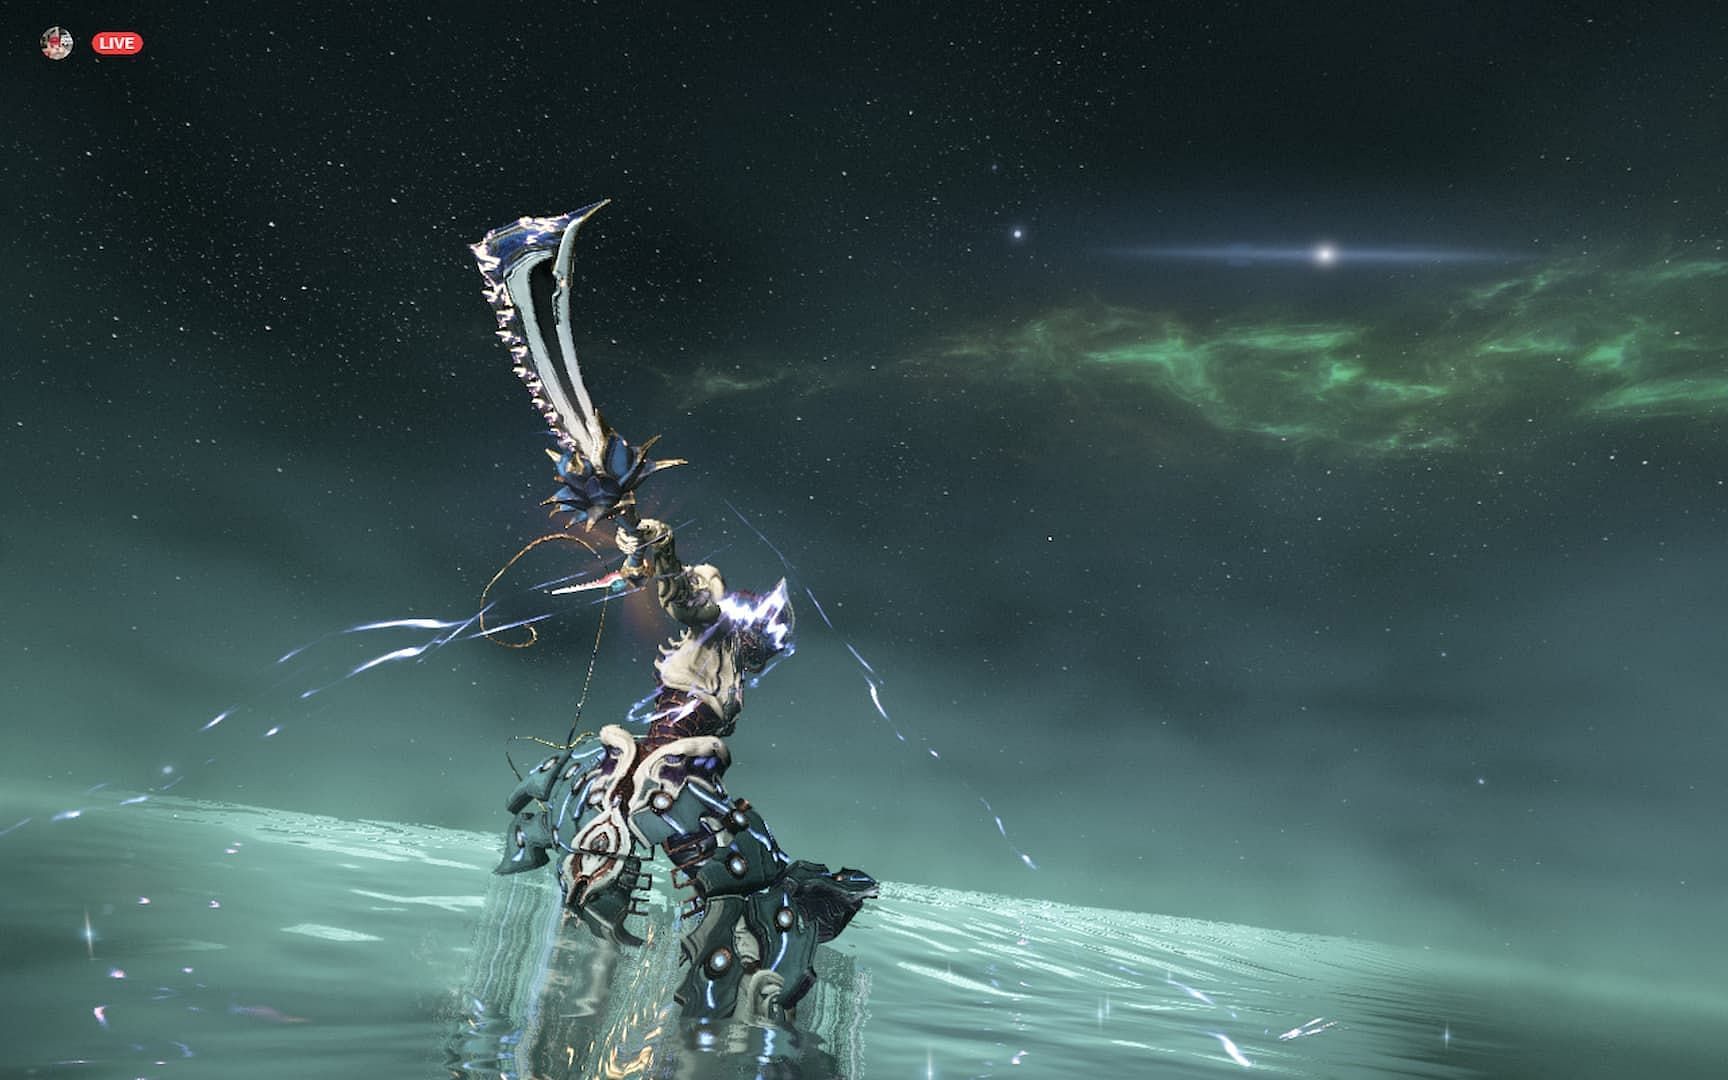 Gyre using the Dorrclave blade and whip weapon in Saturn Six Captura scene, featuring Veratria Blade and Whip skin